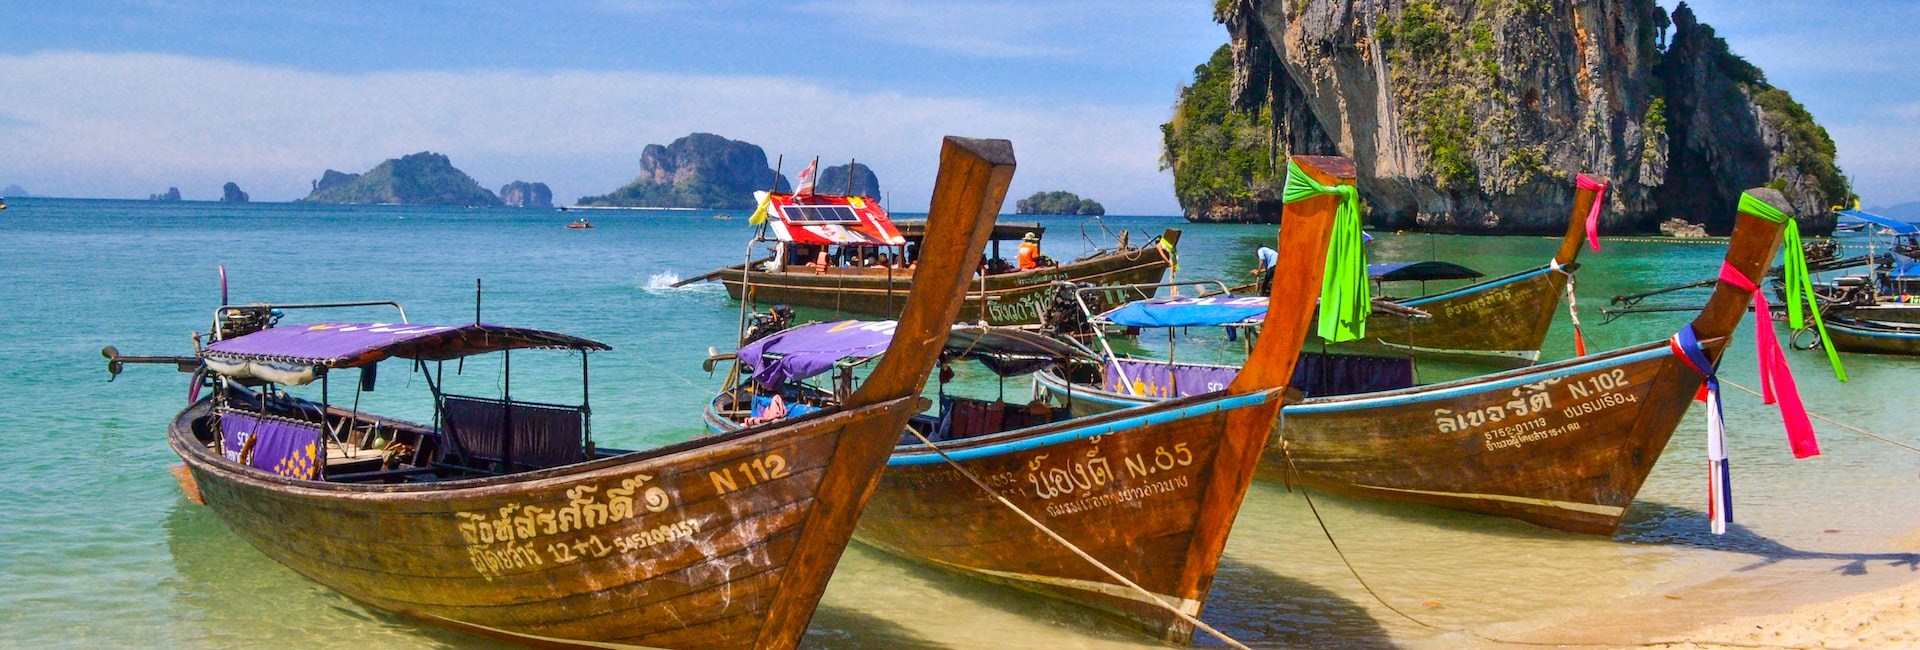 Wooden boats docked up on a breath-taking bay